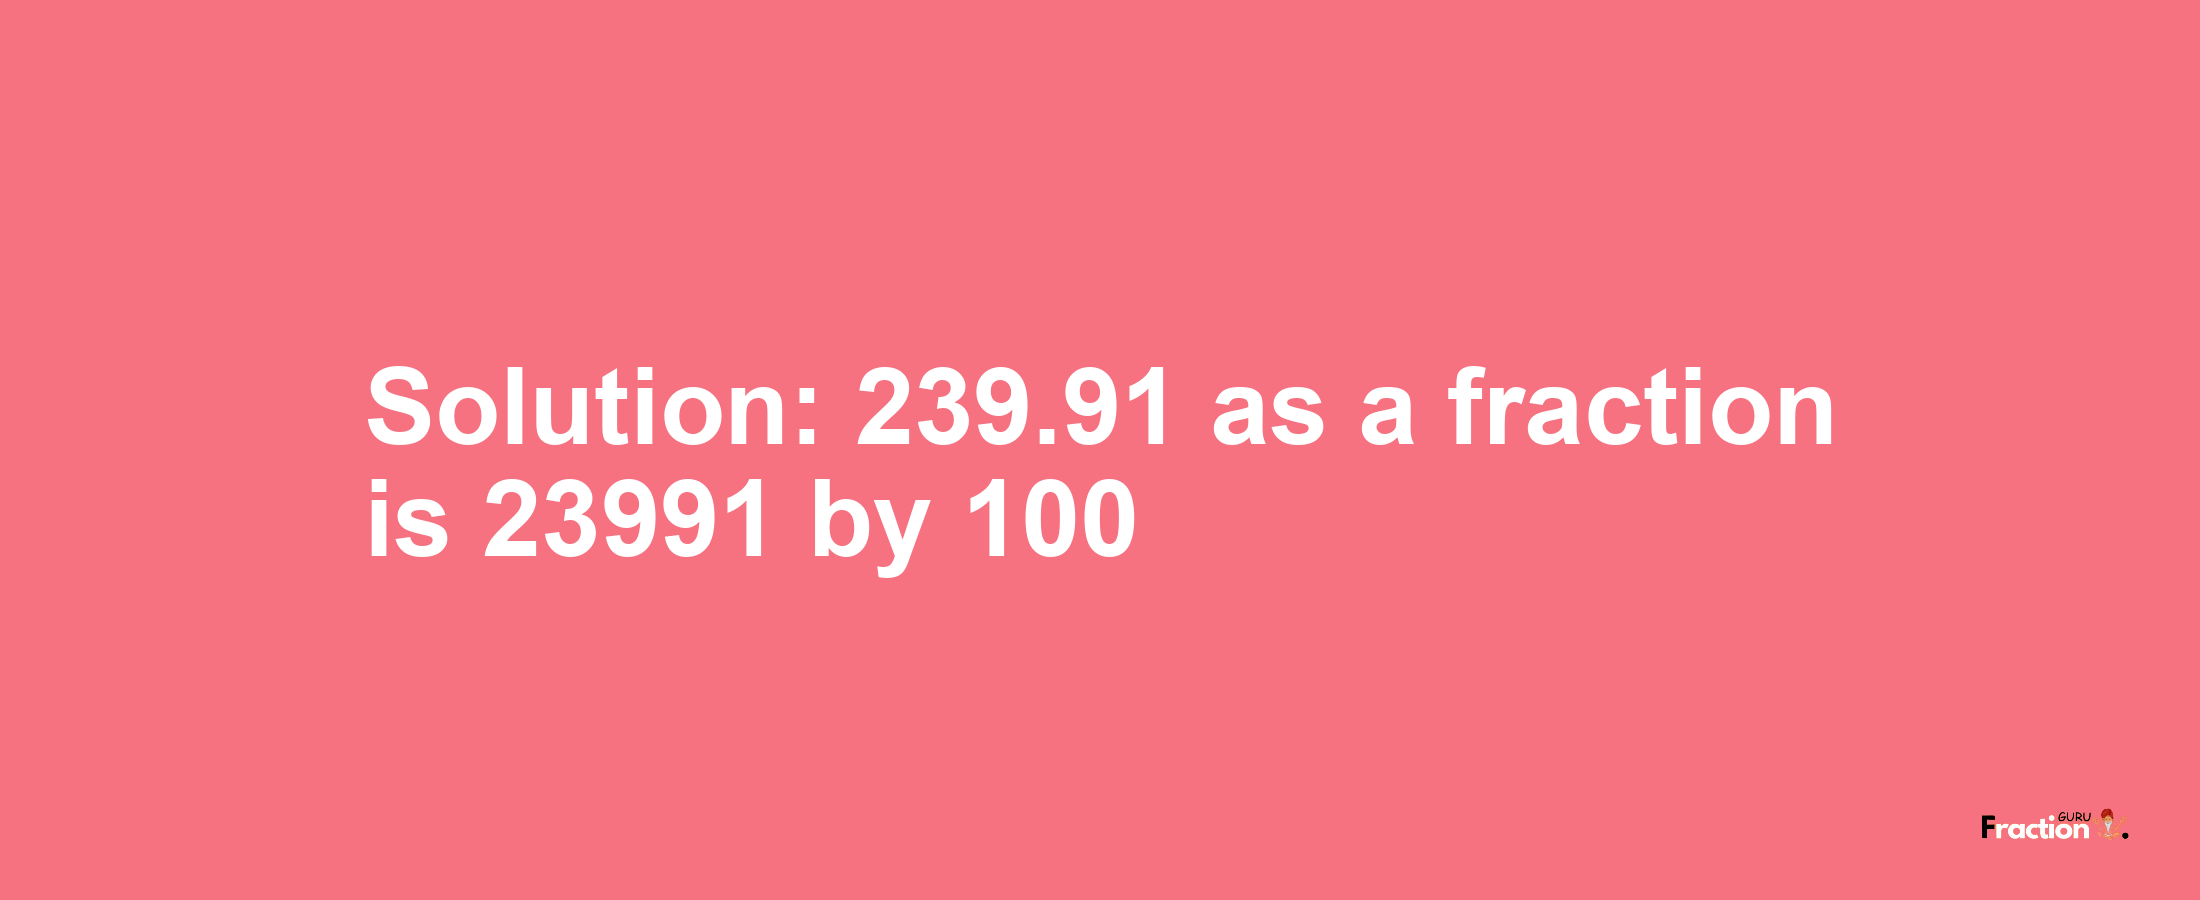 Solution:239.91 as a fraction is 23991/100